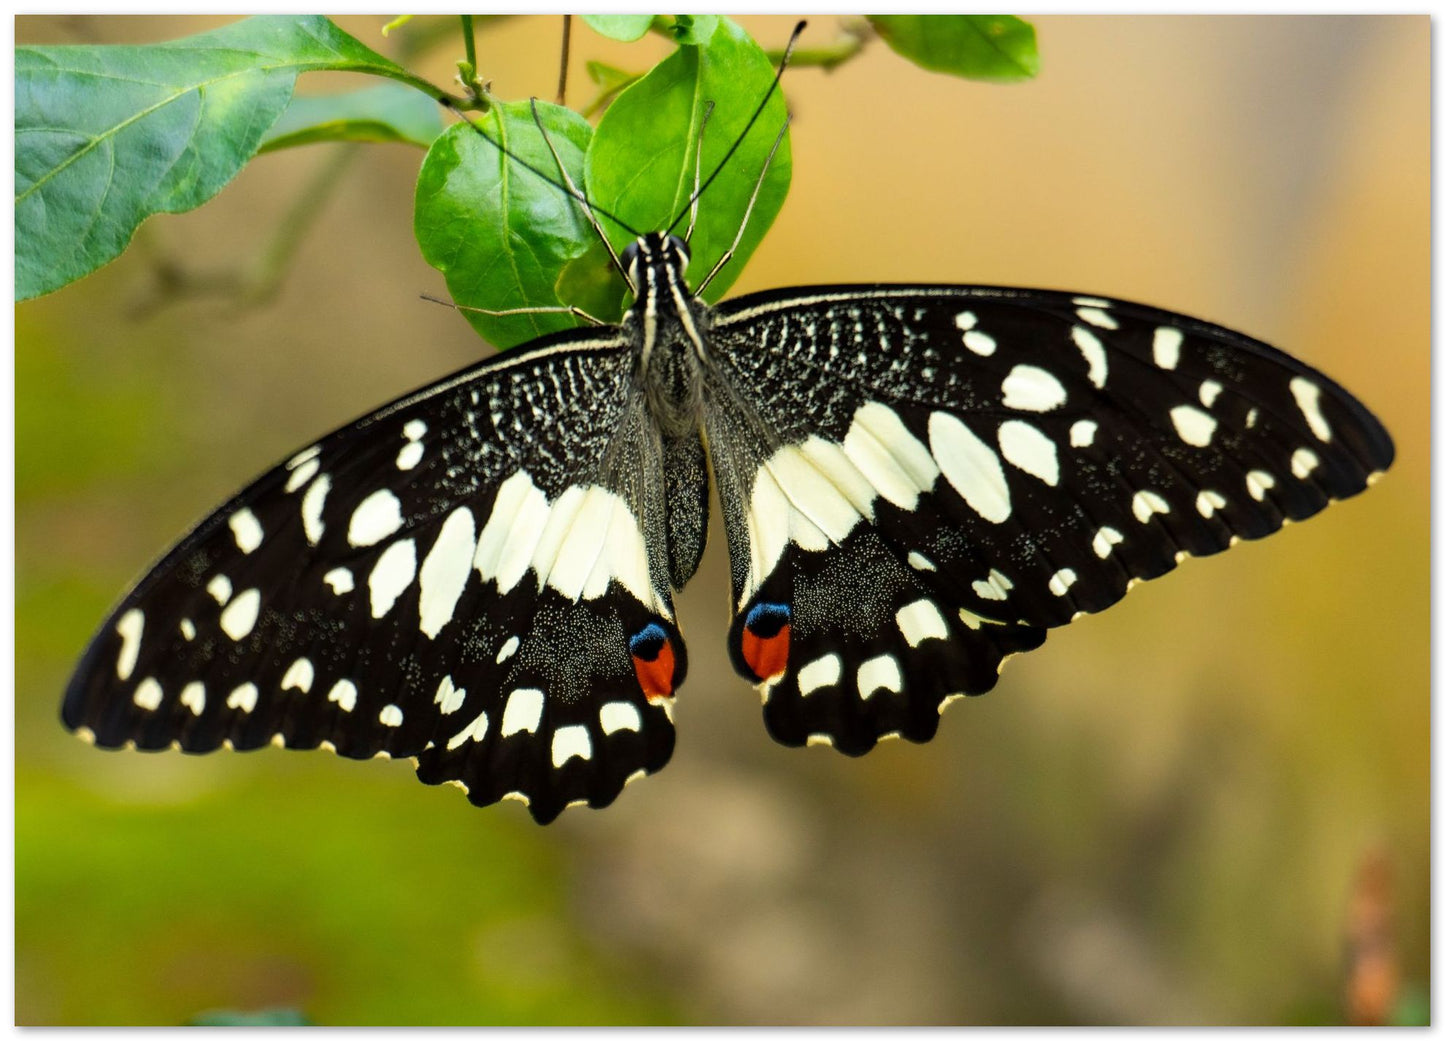 Black butterfly flapping its wings perched on a leaf - @ColorizeStudio